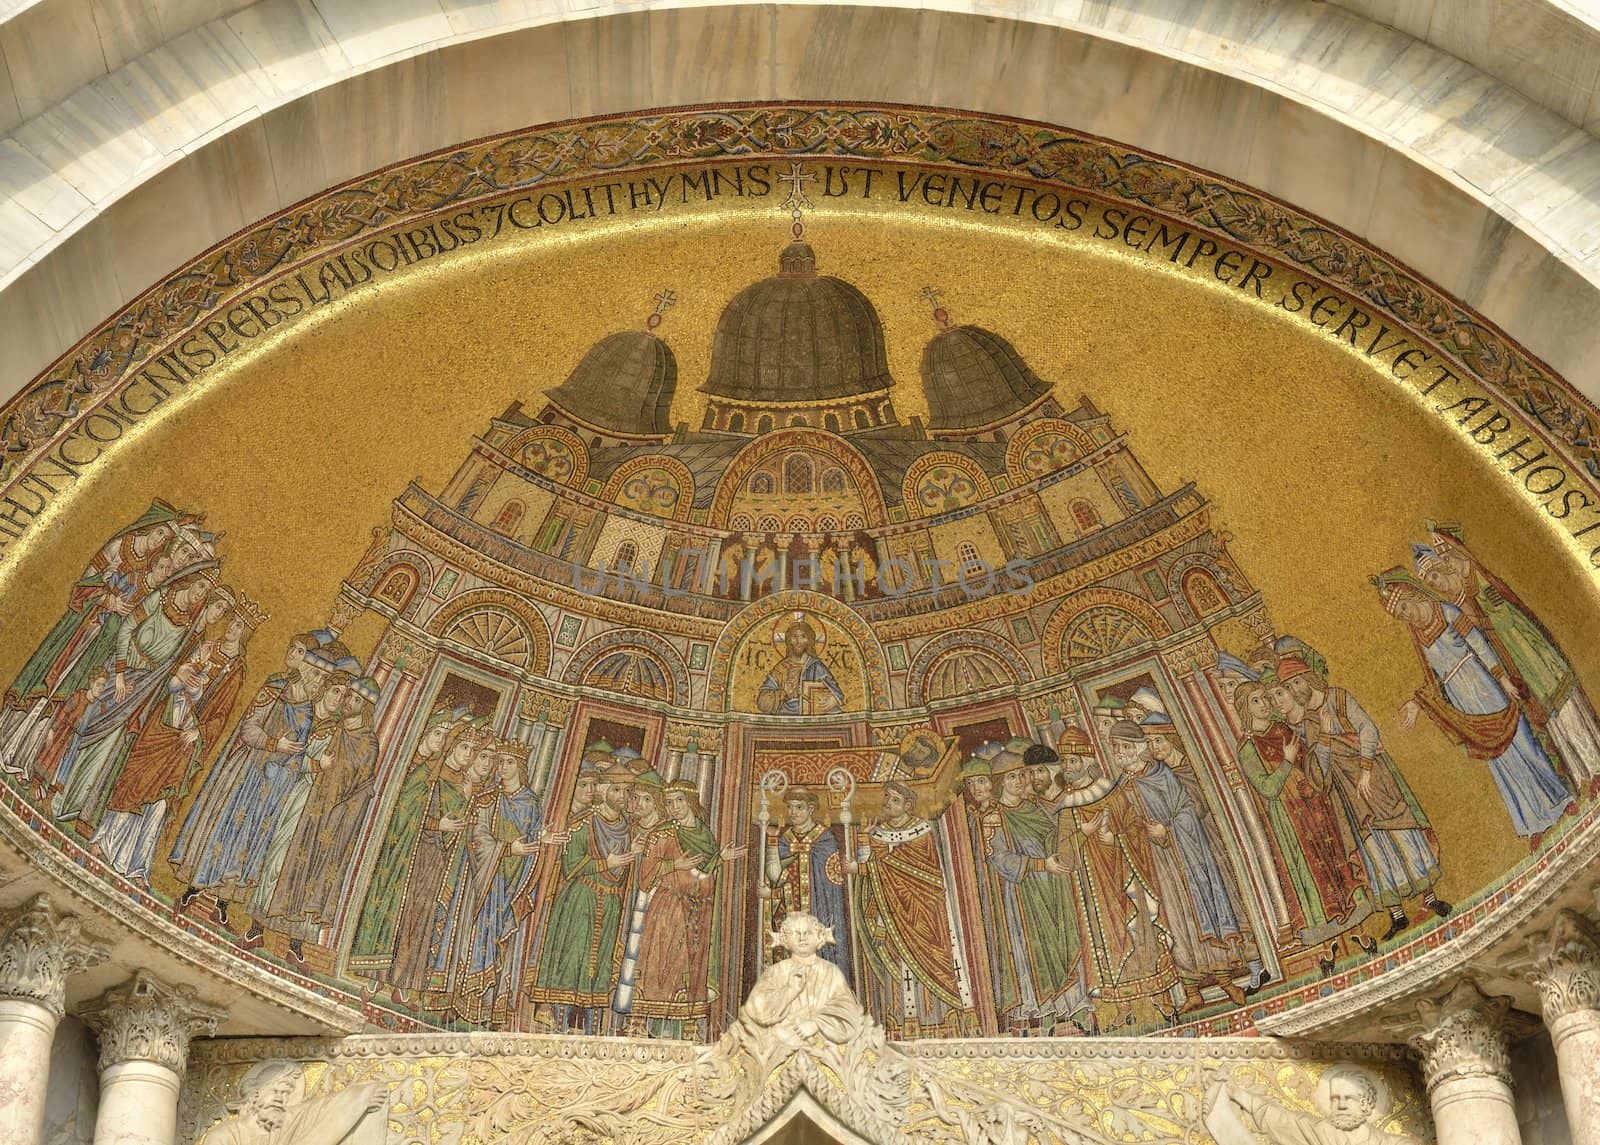 Detail of Frescoes on the front of Basilica of Saint Mark in Venice, Italy.
